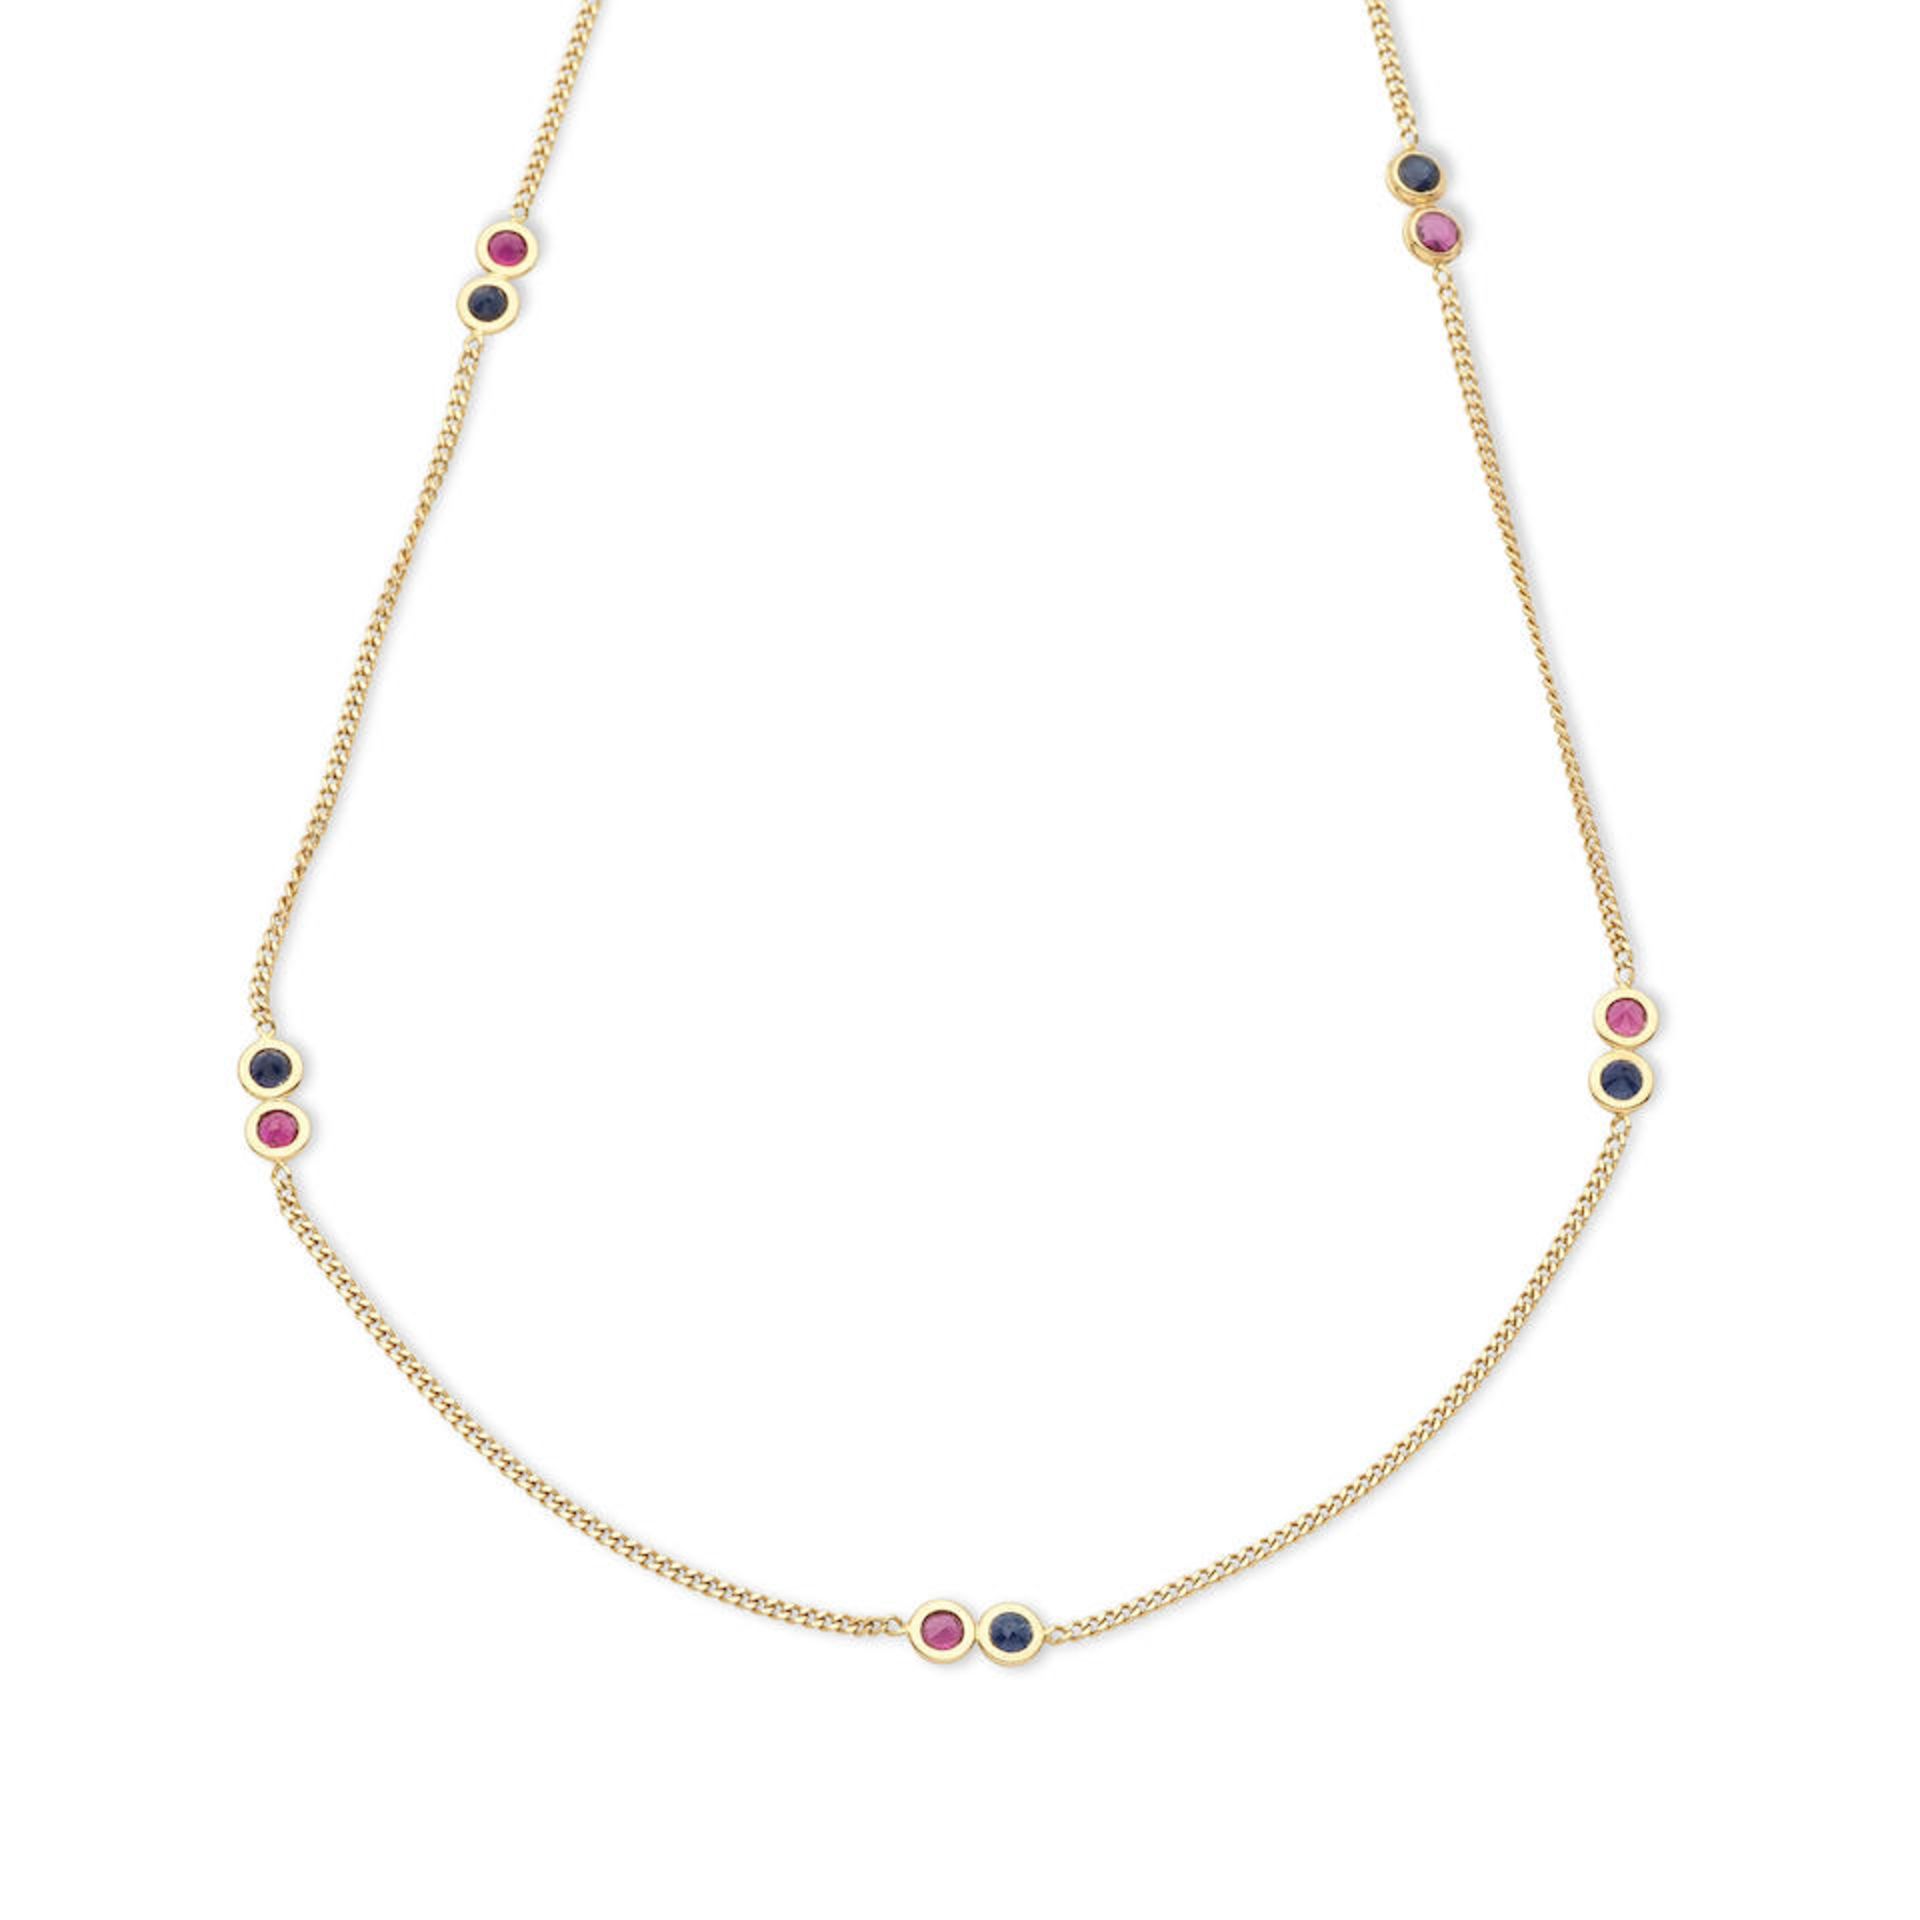 RUBY AND SAPPHIRE NECKLACE COLLIER RUBIS ET SAPHIRS - Image 2 of 2